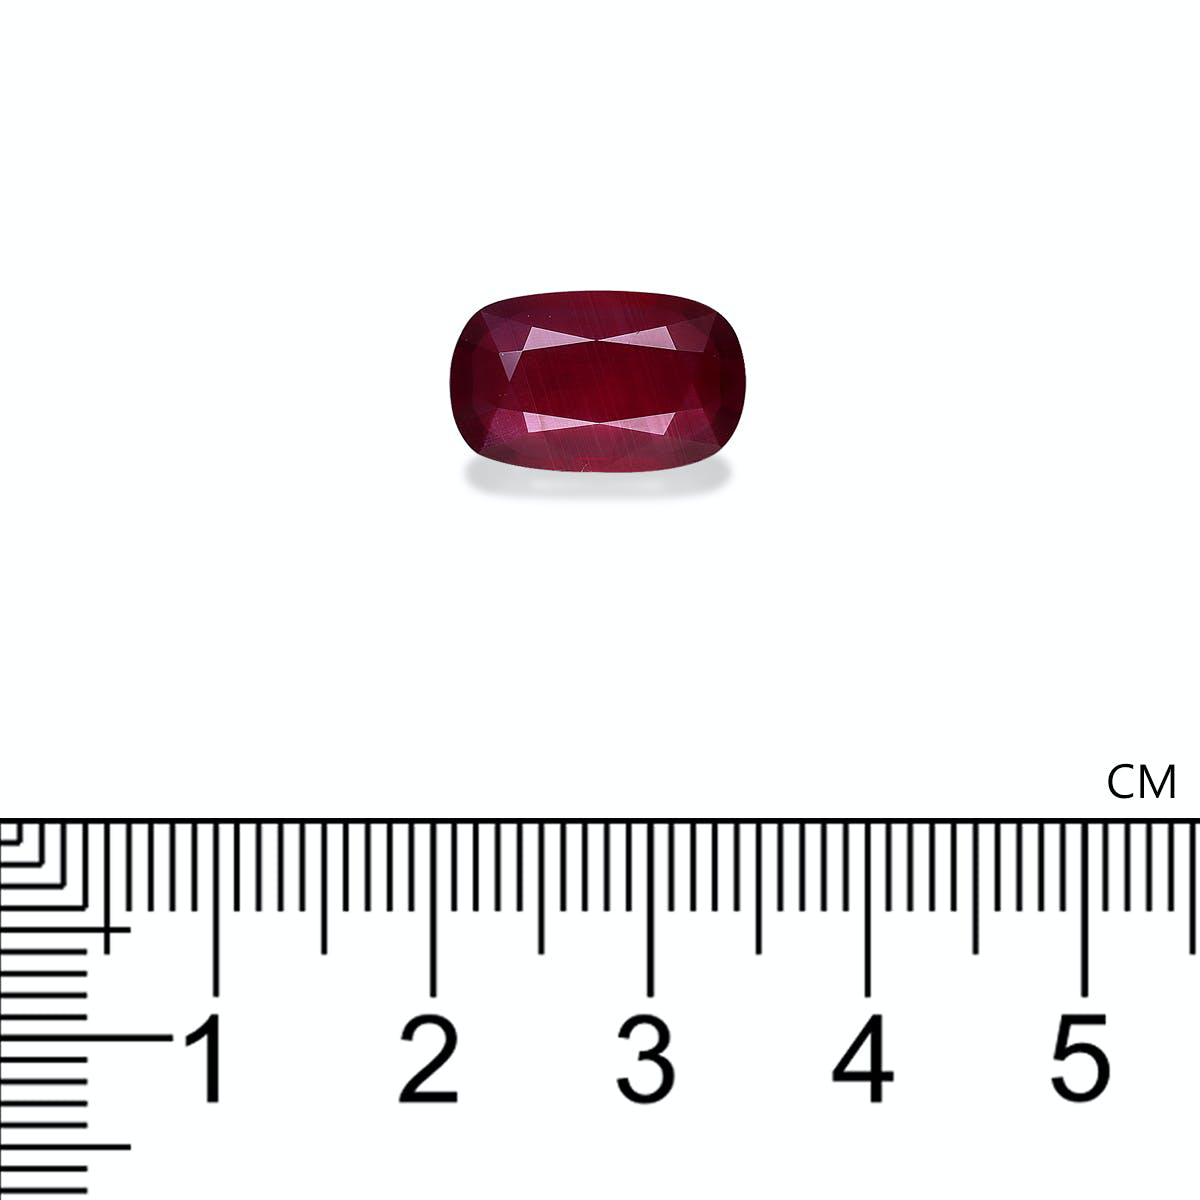 Picture of Pigeons Blood Unheated Mozambique Ruby 5.03ct (SA71-42)